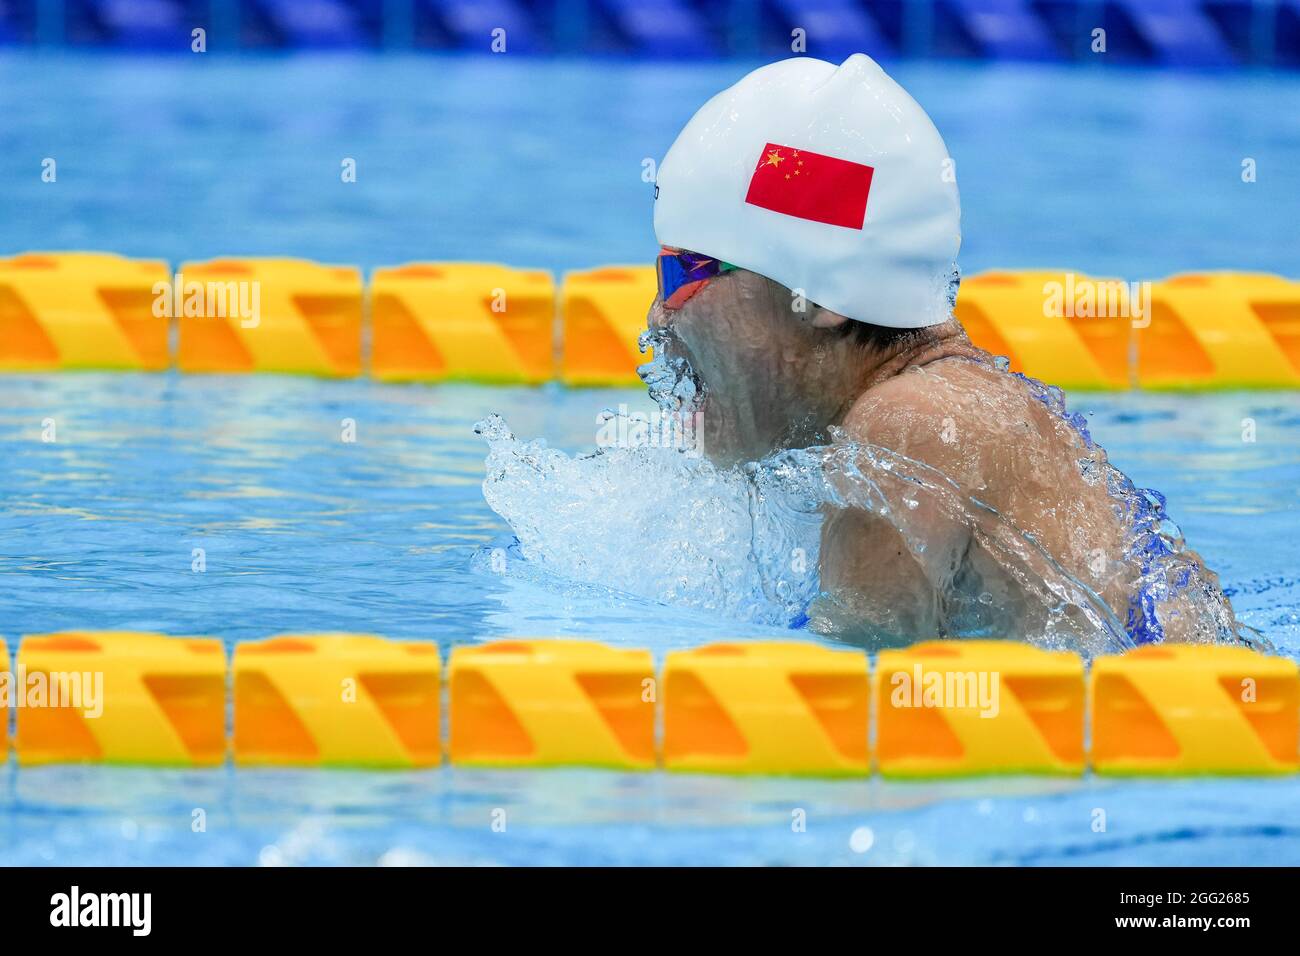 Tokyo, Japan. 28th Aug, 2021. Liu Daomin of China competes during the women's 100m breaststroke SB6 final of swimming event at the Tokyo 2020 Paralympic Games in Tokyo, Japan, Aug. 28, 2021. Credit: Zhu Wei/Xinhua/Alamy Live News Stock Photo